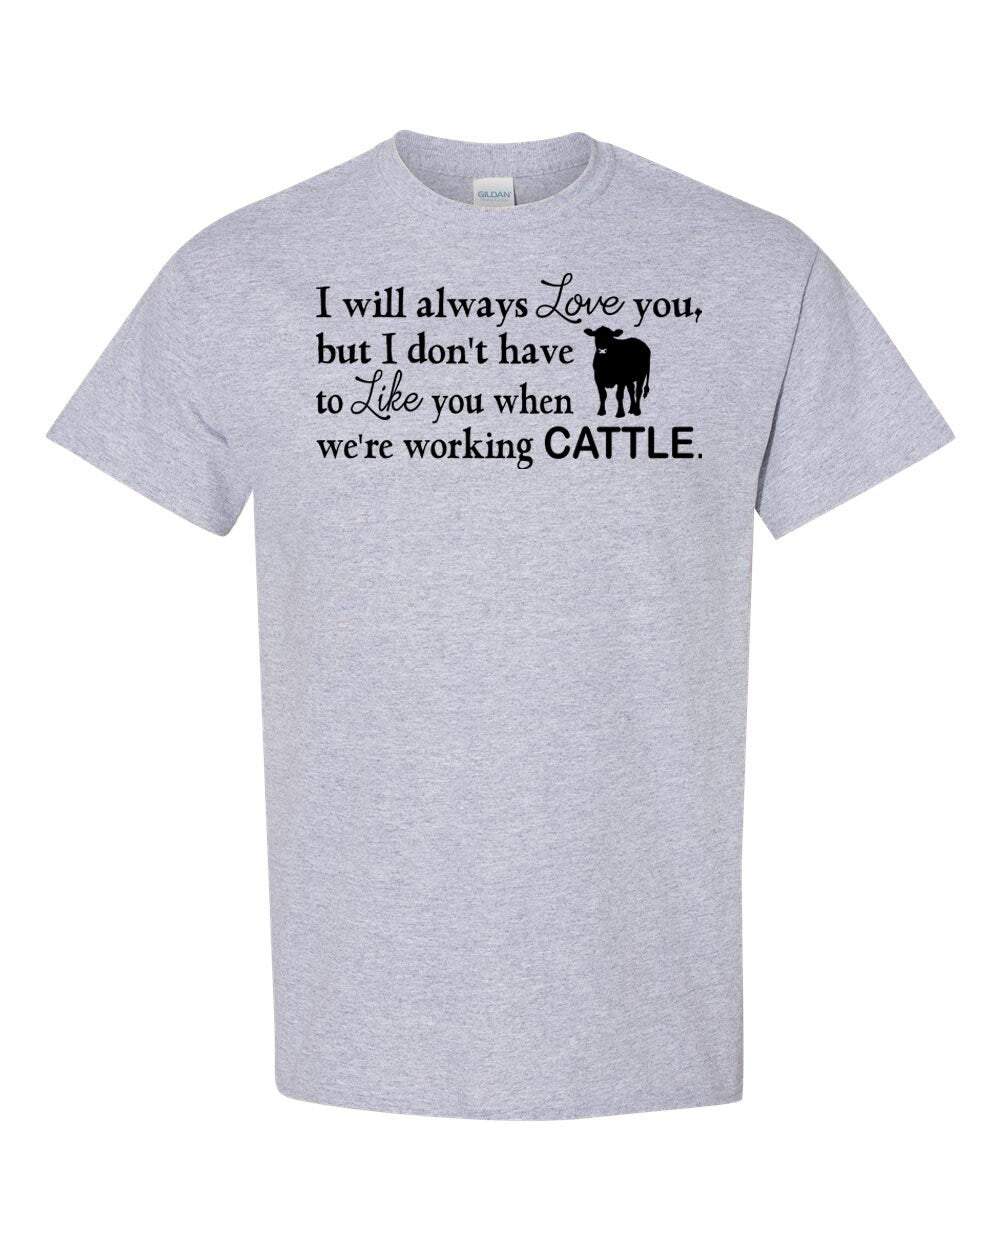 I Don't Have to Like You When Working Cattle Download | Cryin Creek